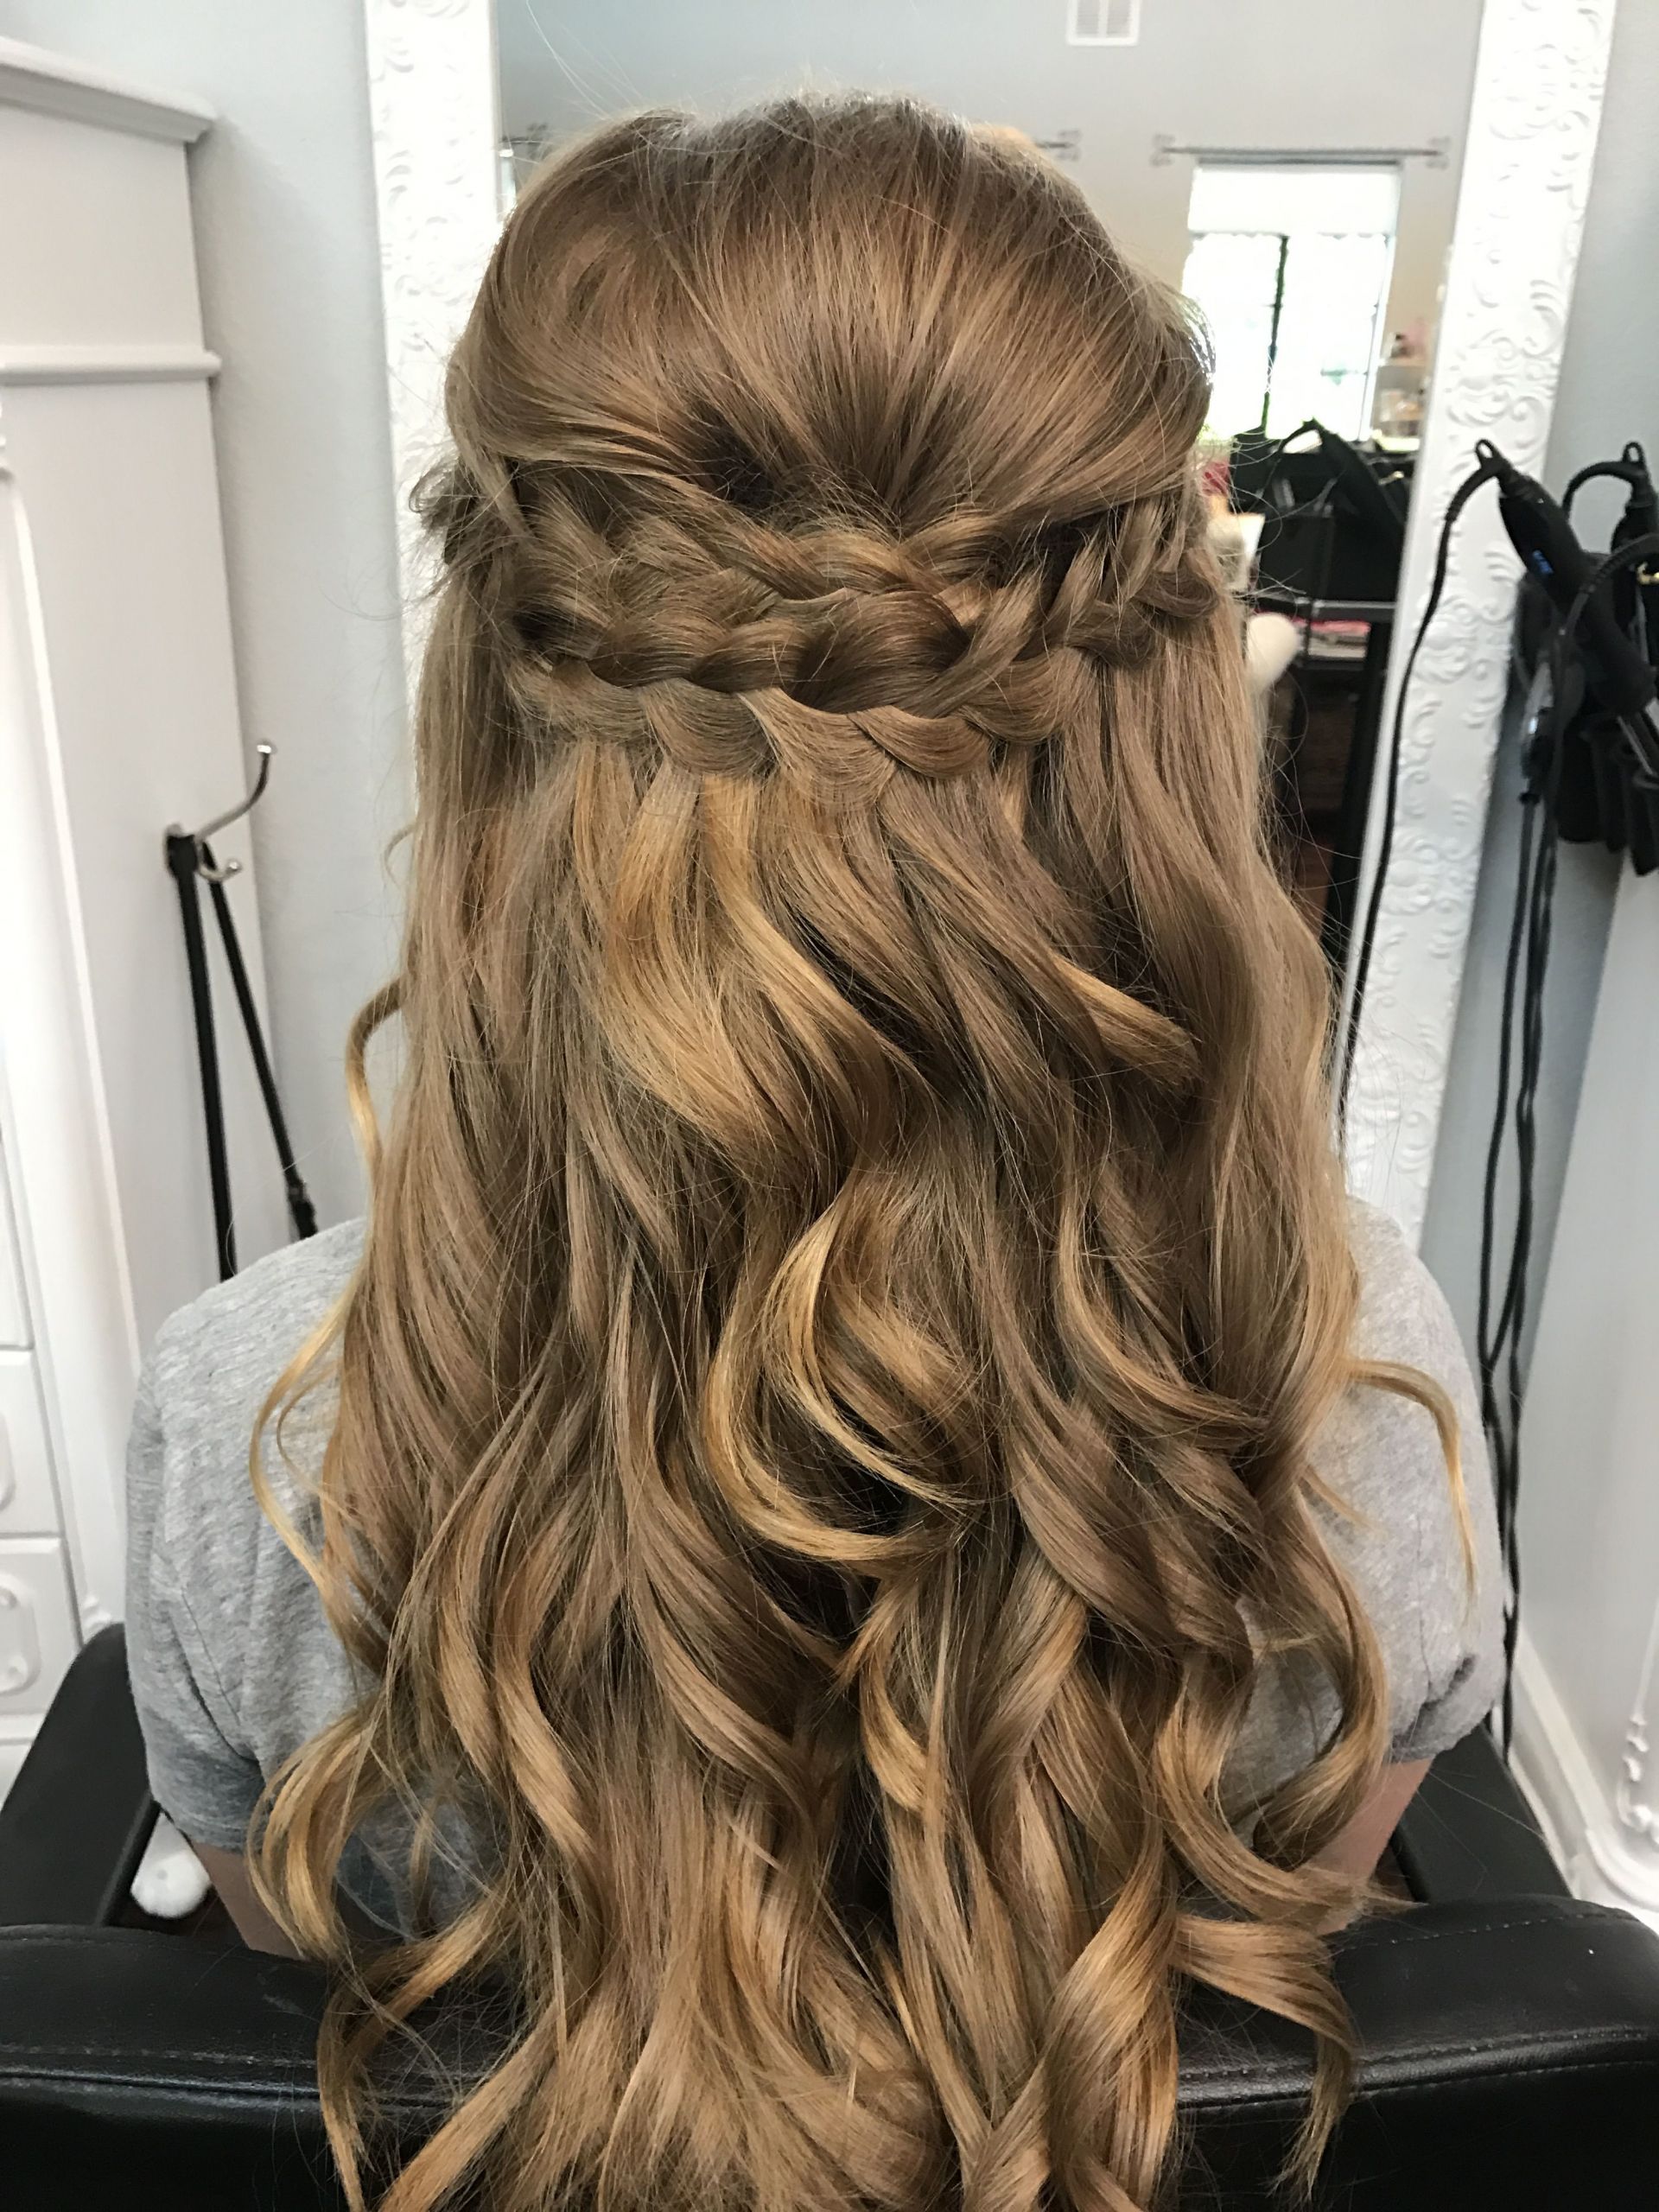 Down Prom Hairstyles
 Braided half up half down prom hair